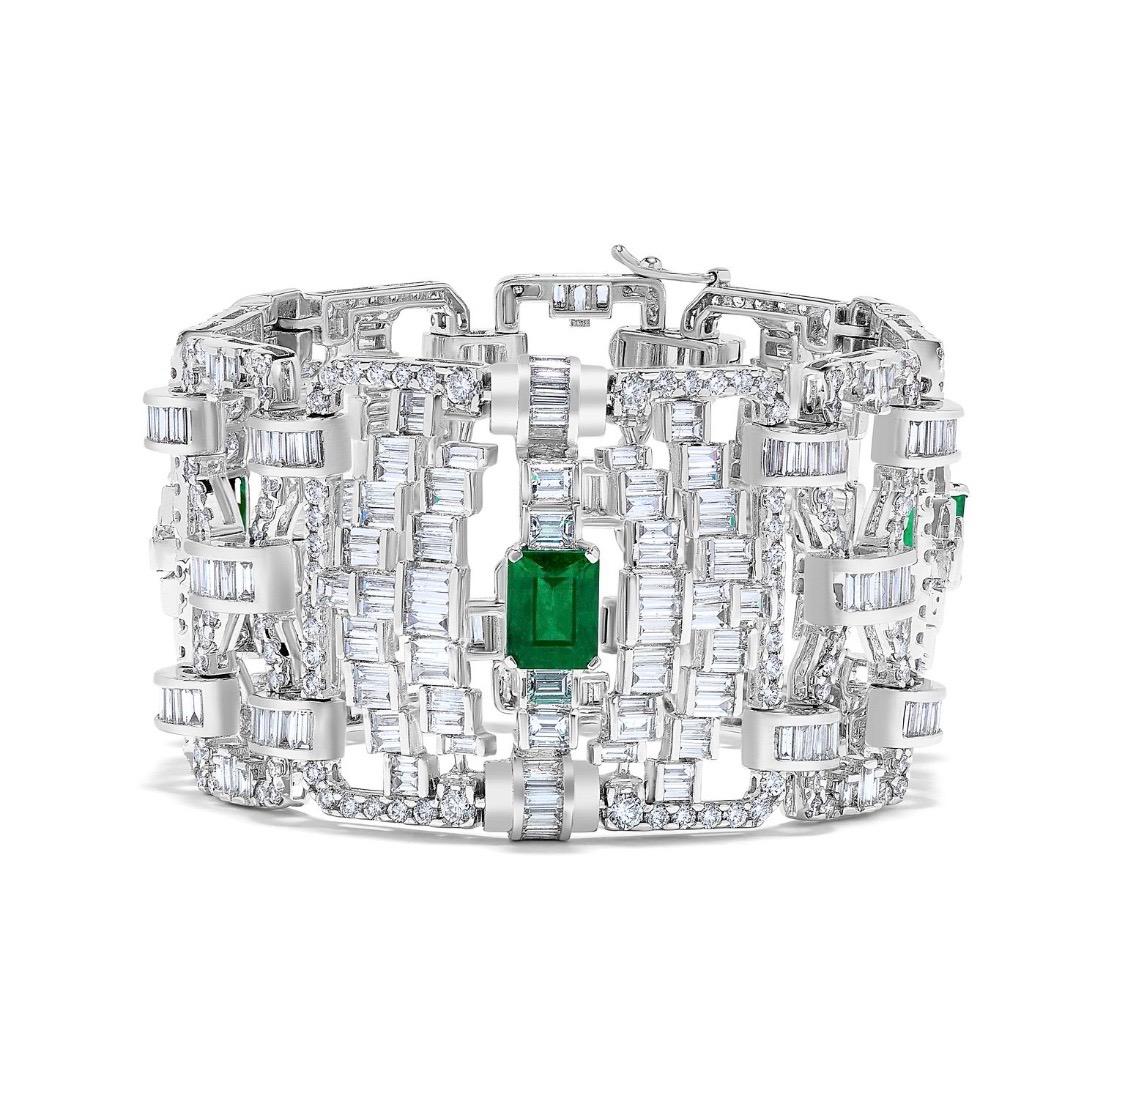 From the Emilio Jewelry Vault, Showcasing a stunning bracelet:
Emeralds: Certified Colombian emeralds 5.00 Carats are vivid green color with excellent crystal and excellent transparency. 
diamonds: 36.20 carats colorless vvs1 clarity. 
Please